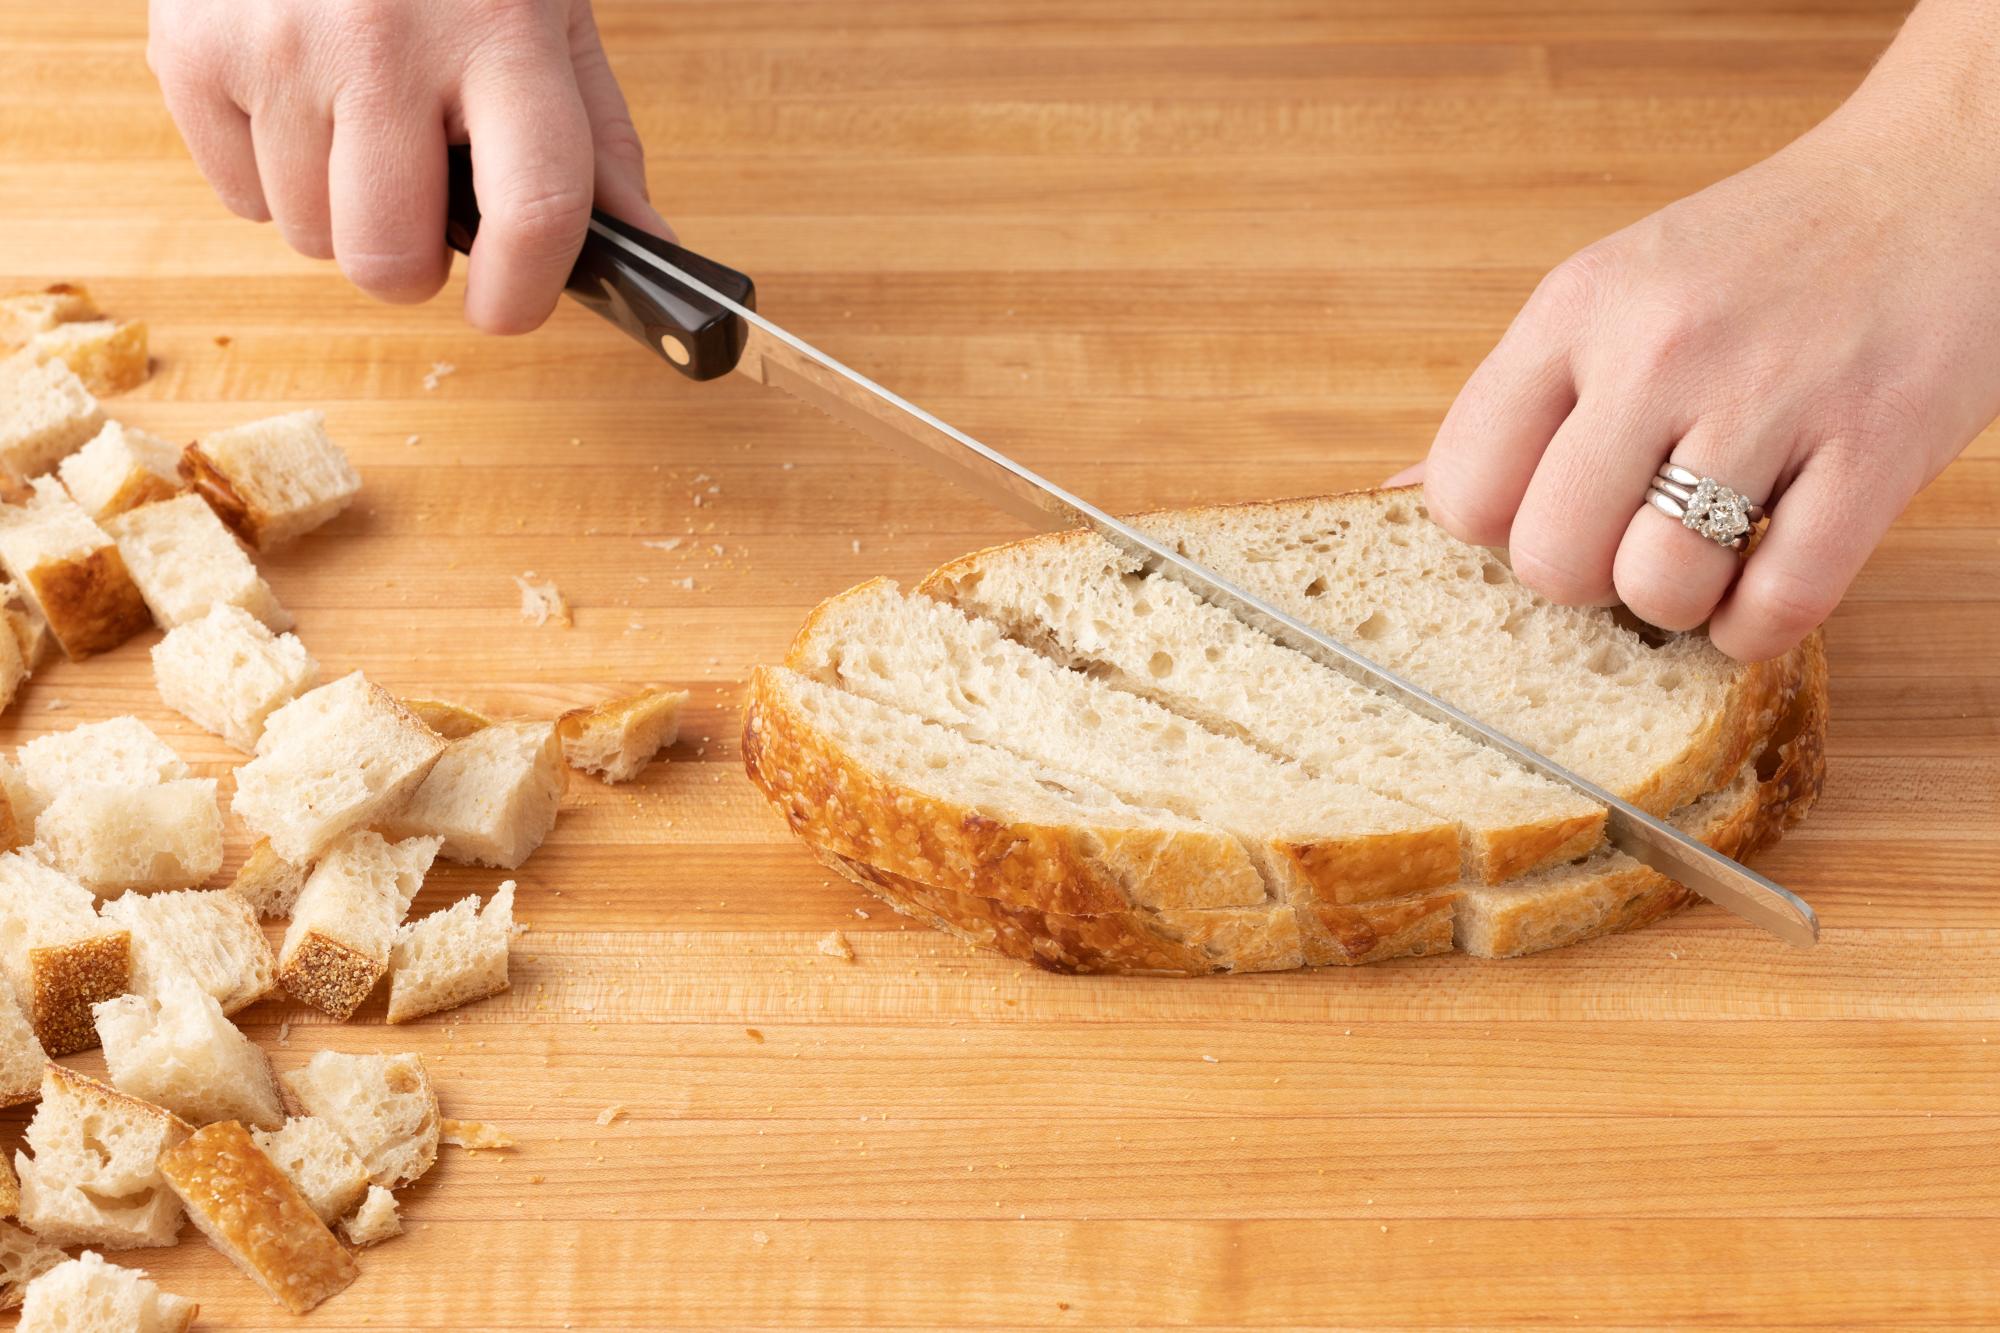 Cutco's 9-3/4 Inch Slicer effortlessly cubes the bread.